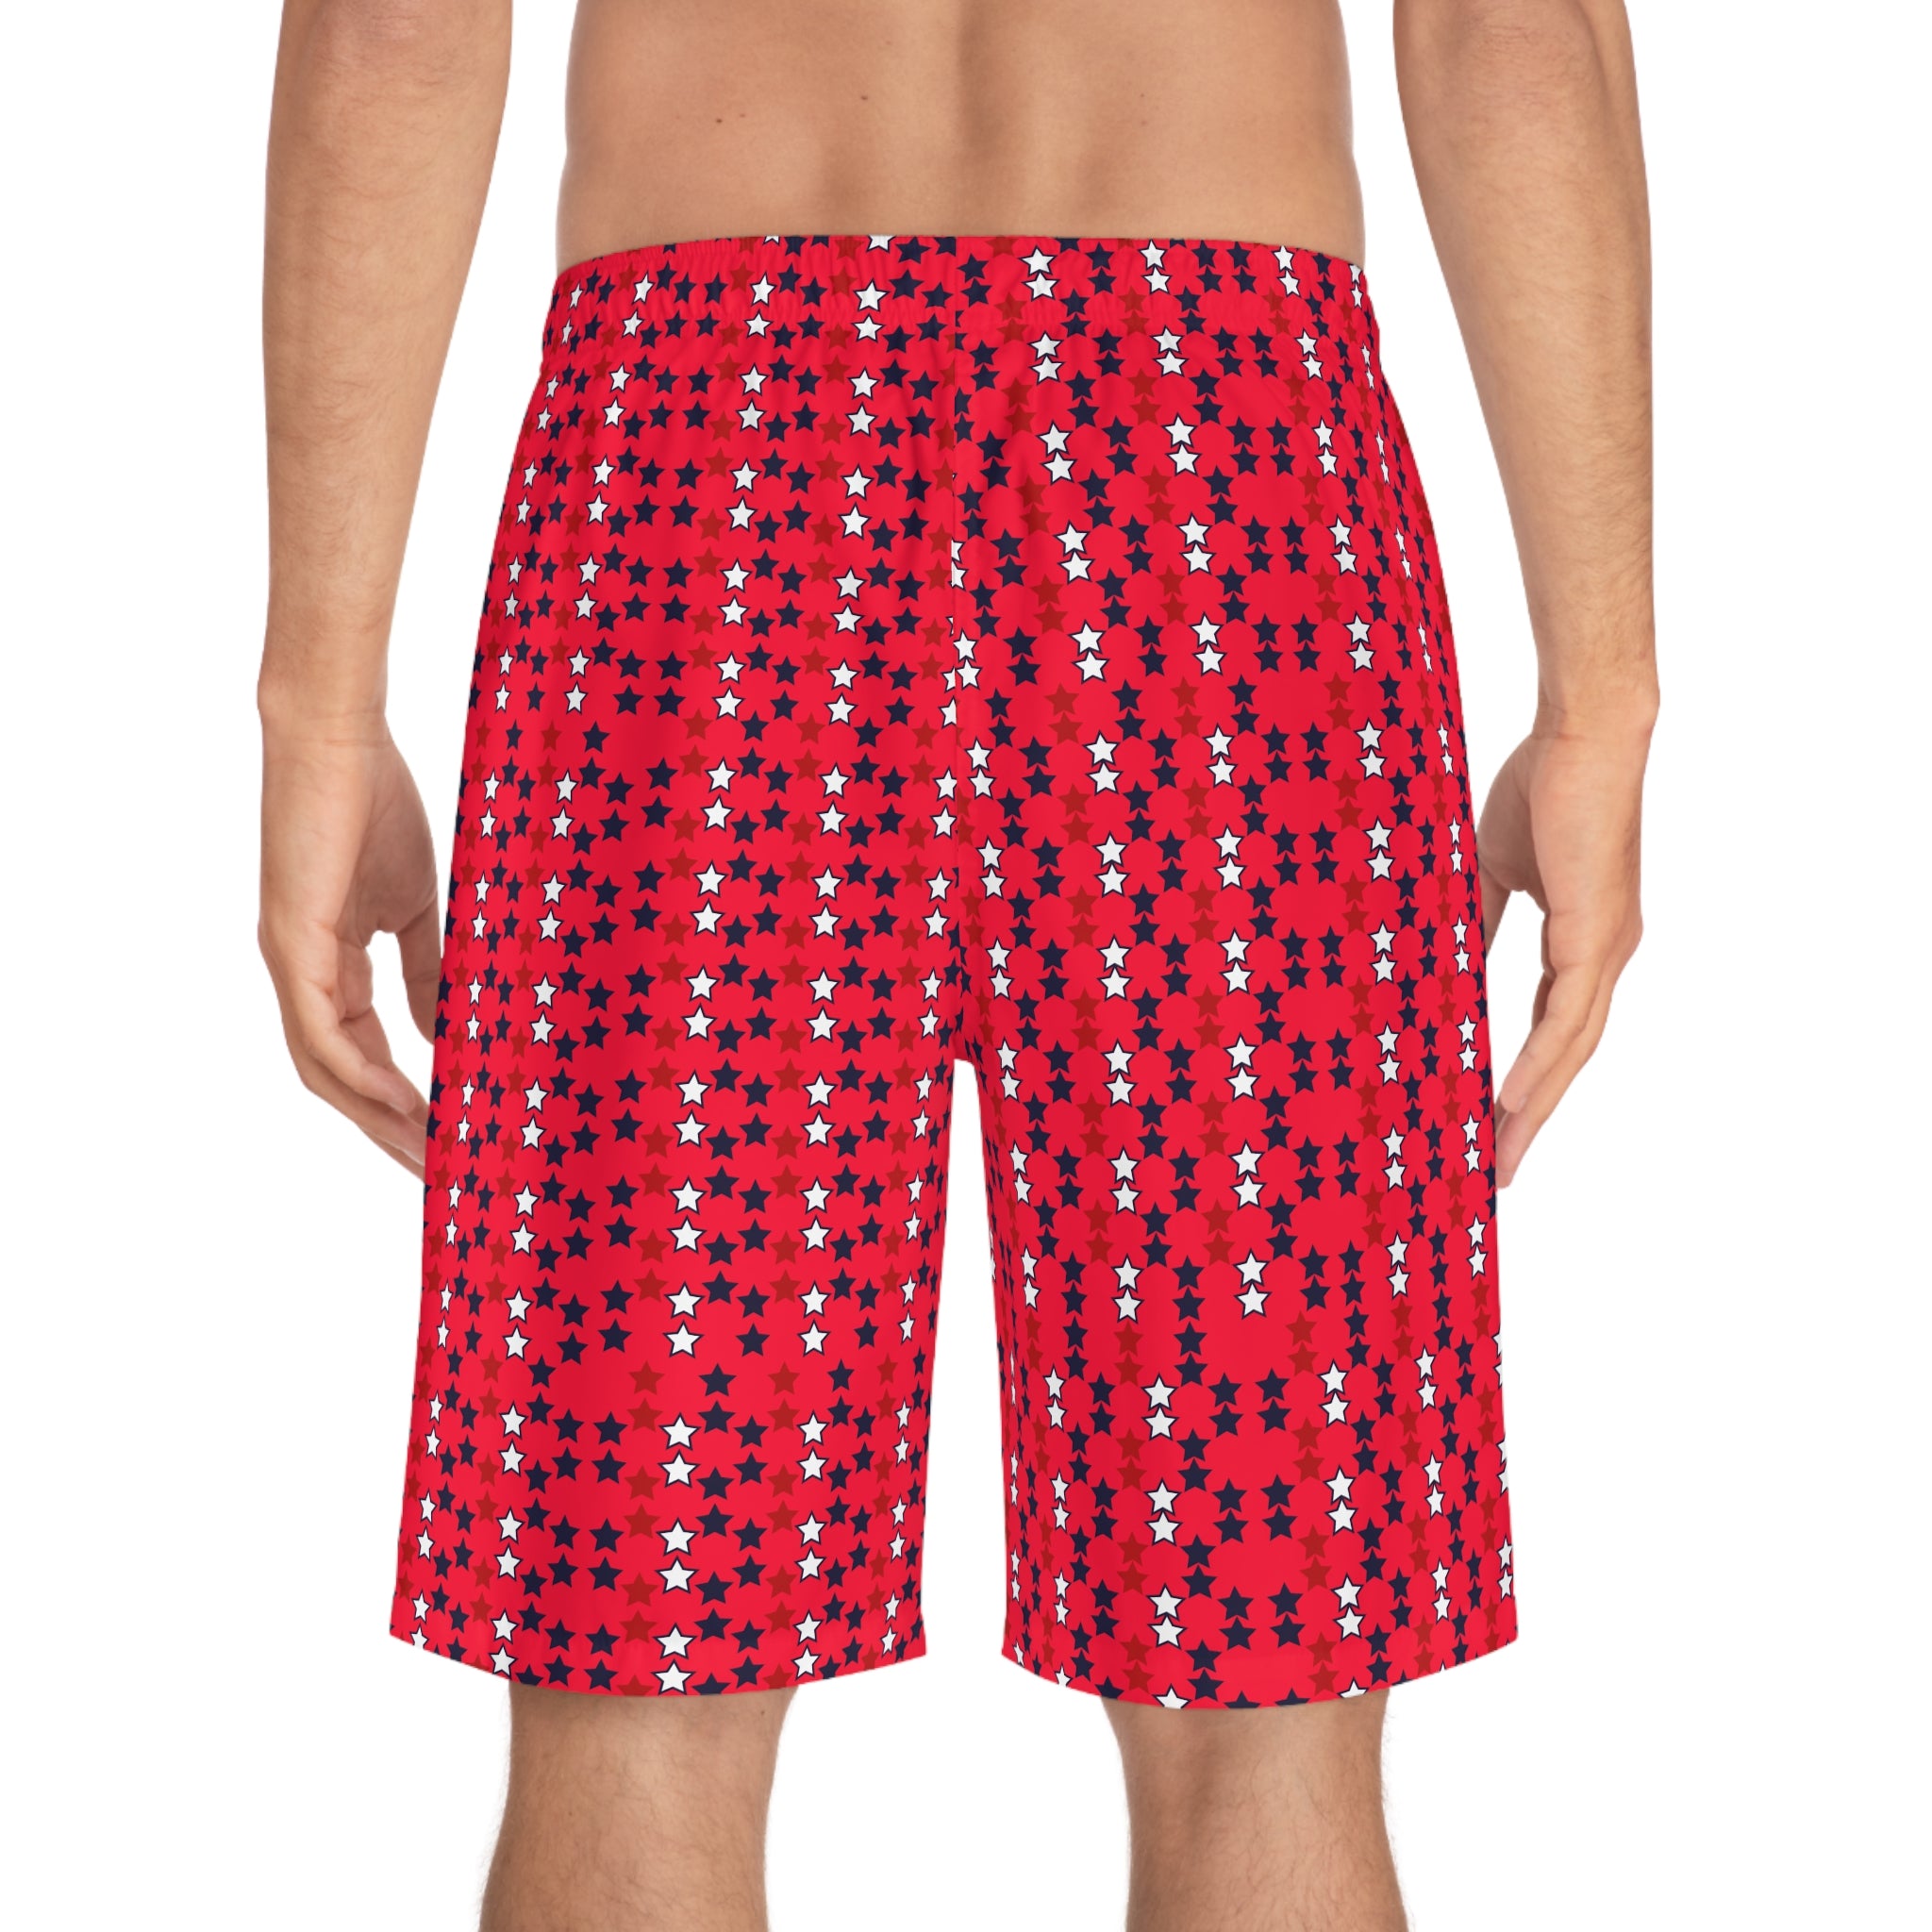 red star print board shorts for men